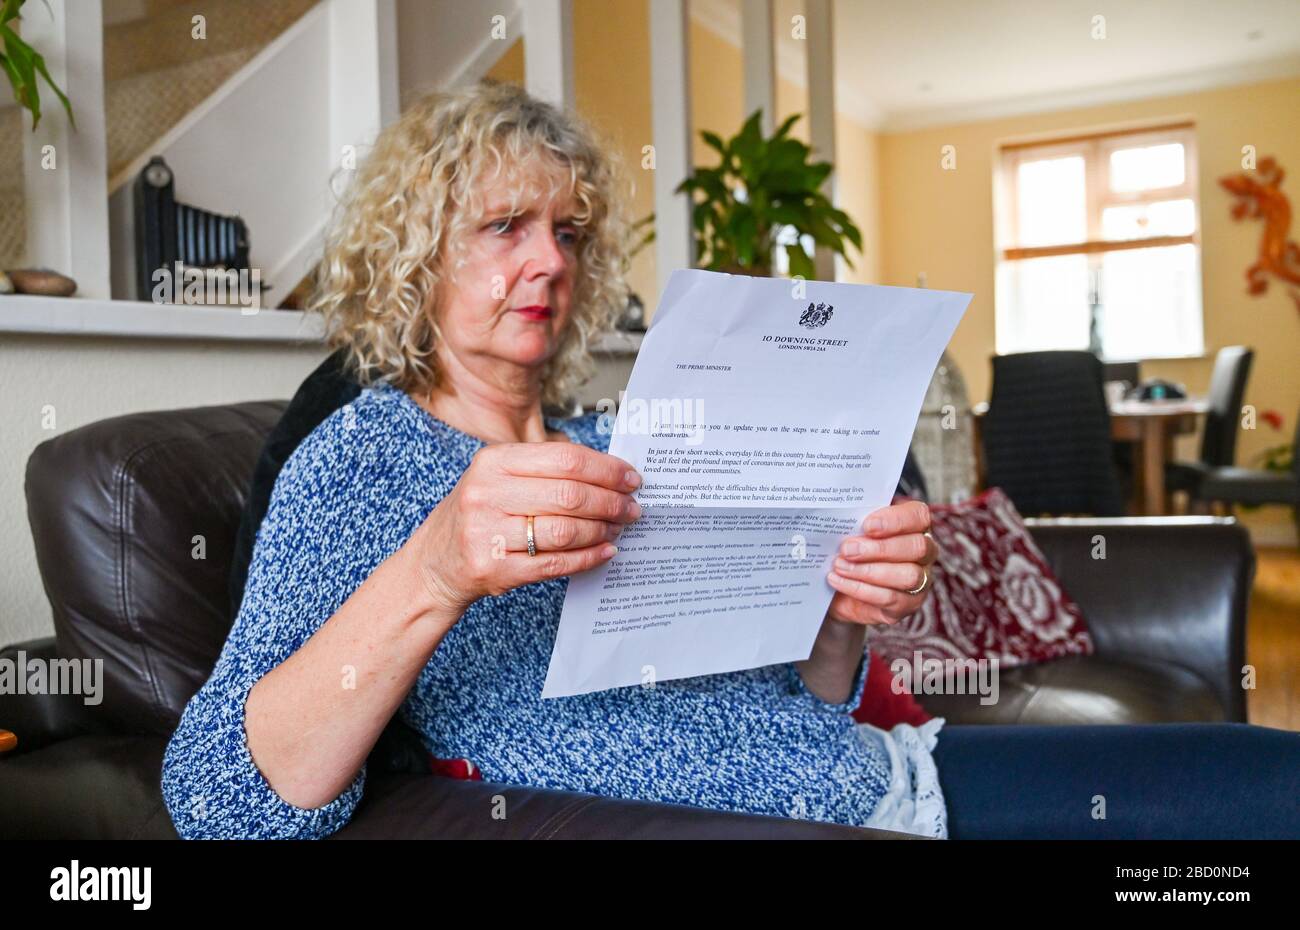 Brighton UK 6th April 2020 - A Brighton resident reads the governments coronavirus update letter sent to every household by Prime Minister Boris Johnson during the Coronavirus COVID-19 pandemic crisis  . Credit: Simon Dack / Alamy Live News Stock Photo